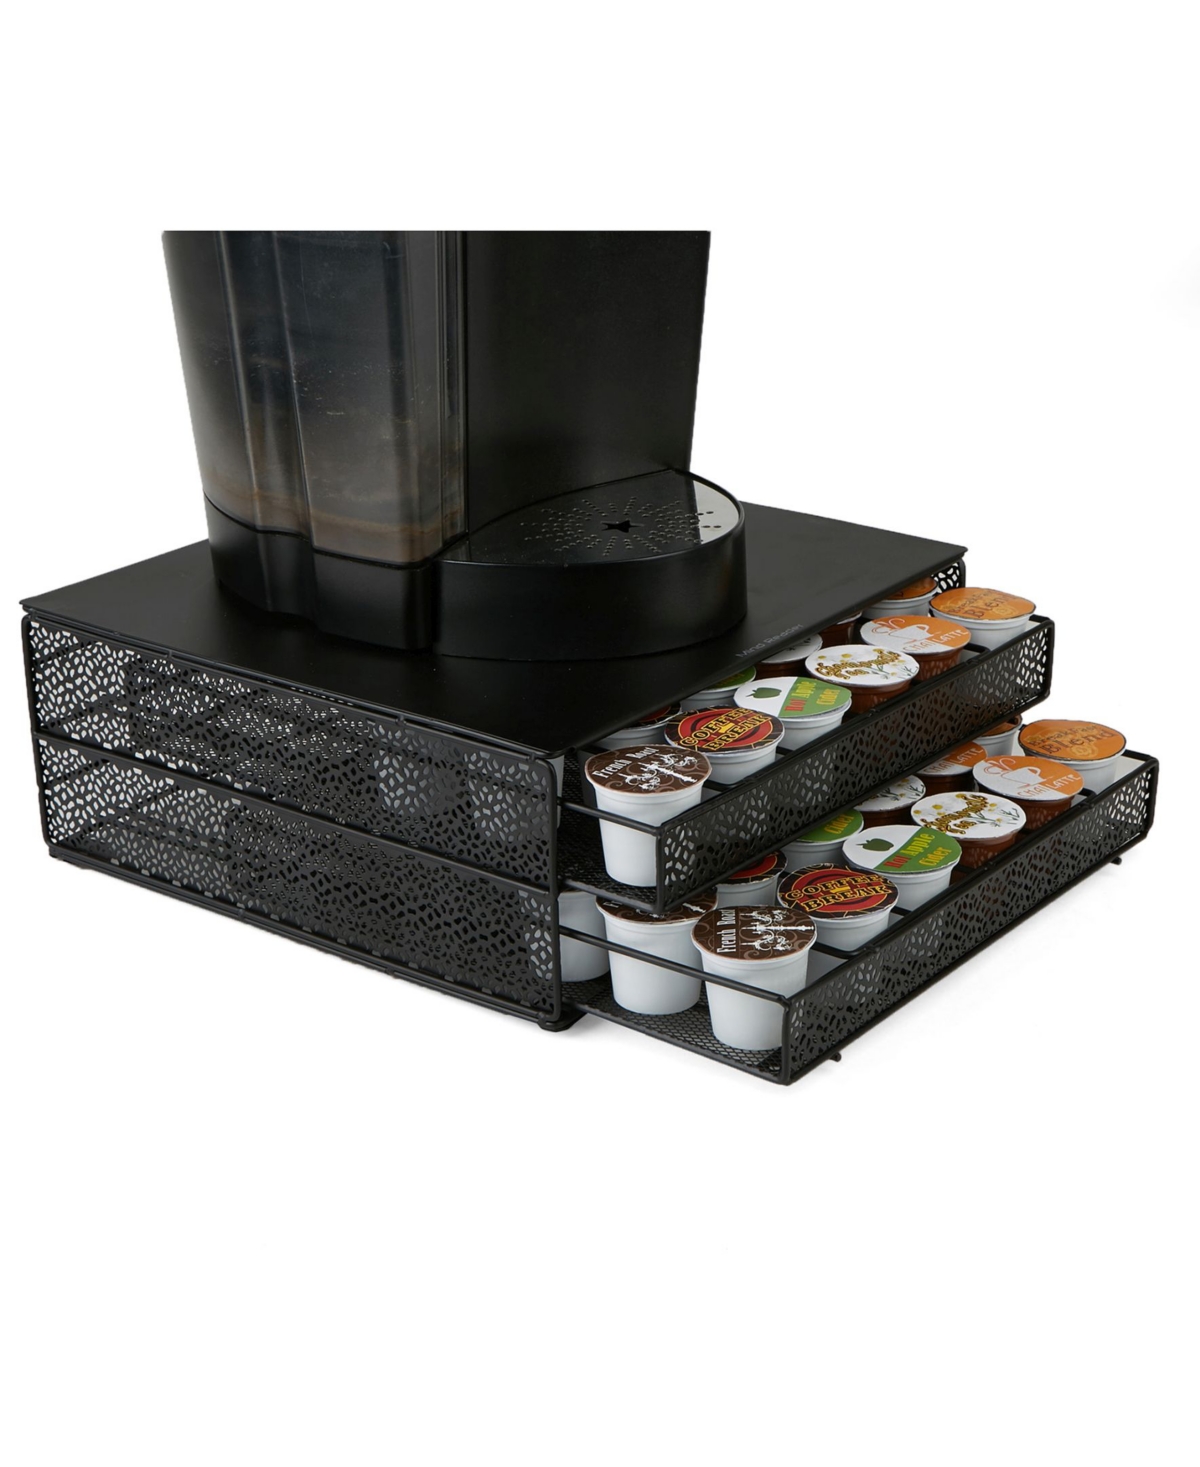 72 Capacity Double K-Cup Storage Tray with Flower Pattern Metal Mesh - Black